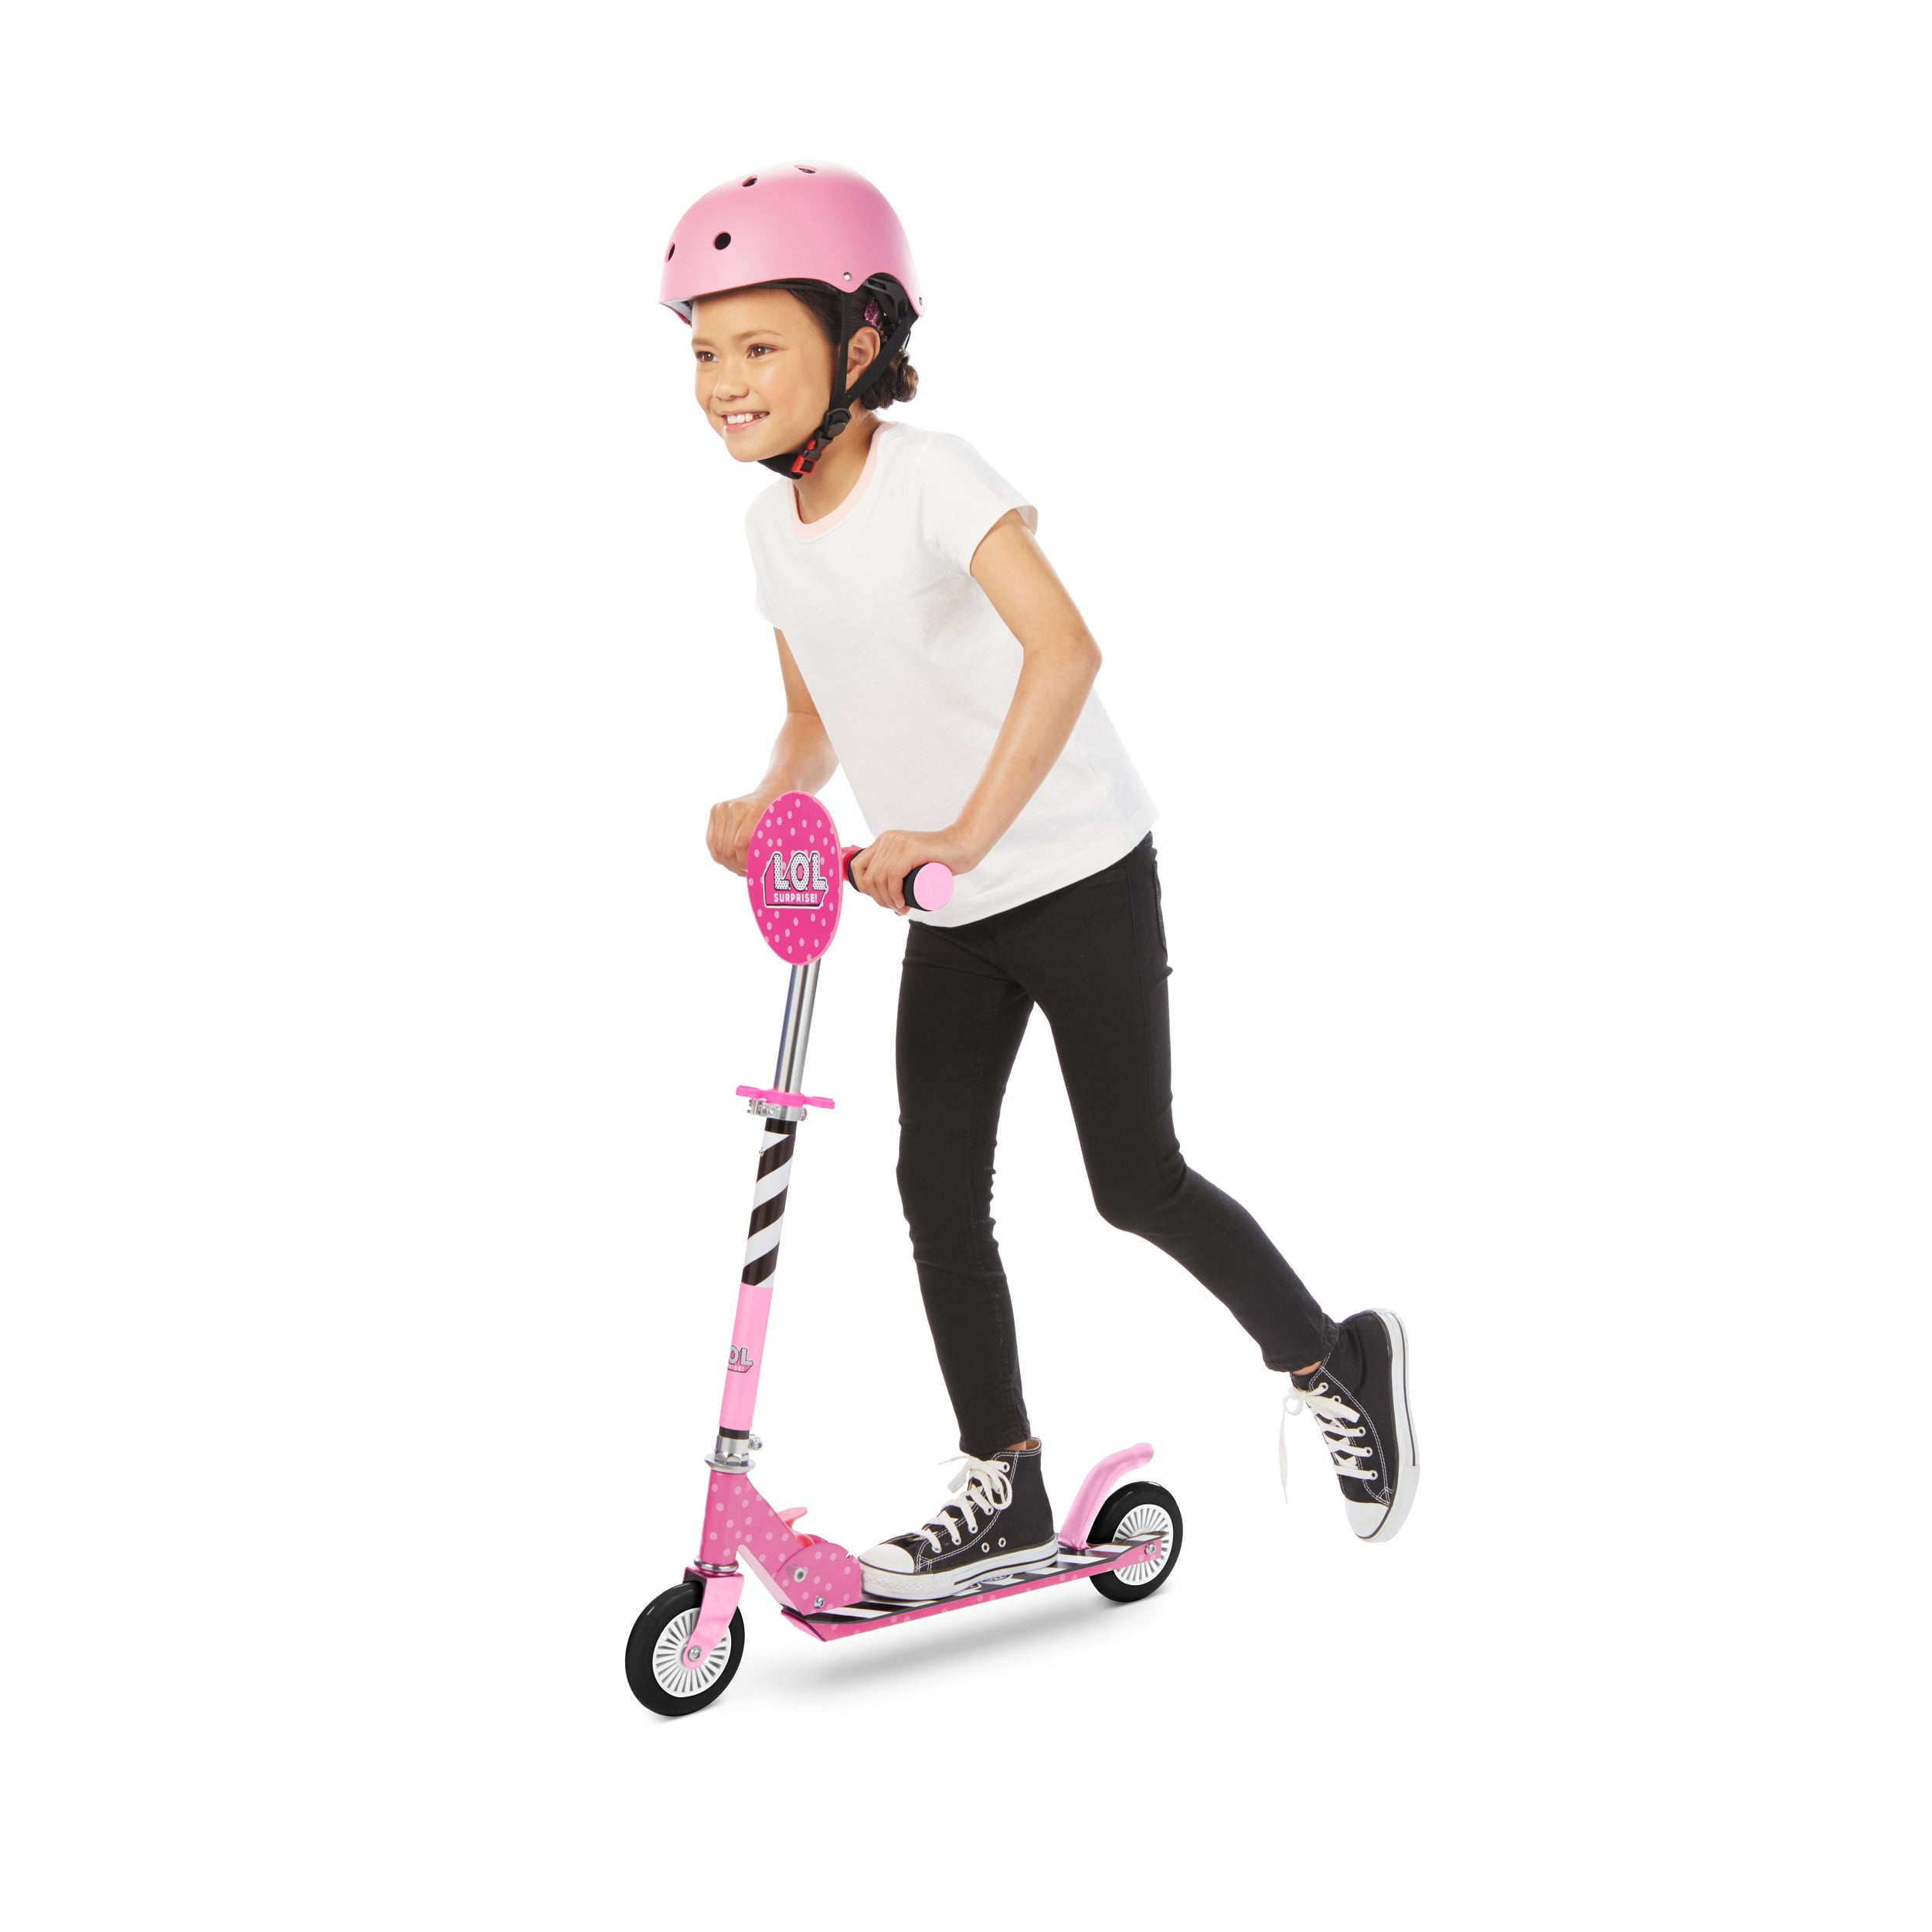 Surprise Folding Kick Scooter Pink/ Blue Kids Outdoor Ride on Toy Fun for sale online L.o.l